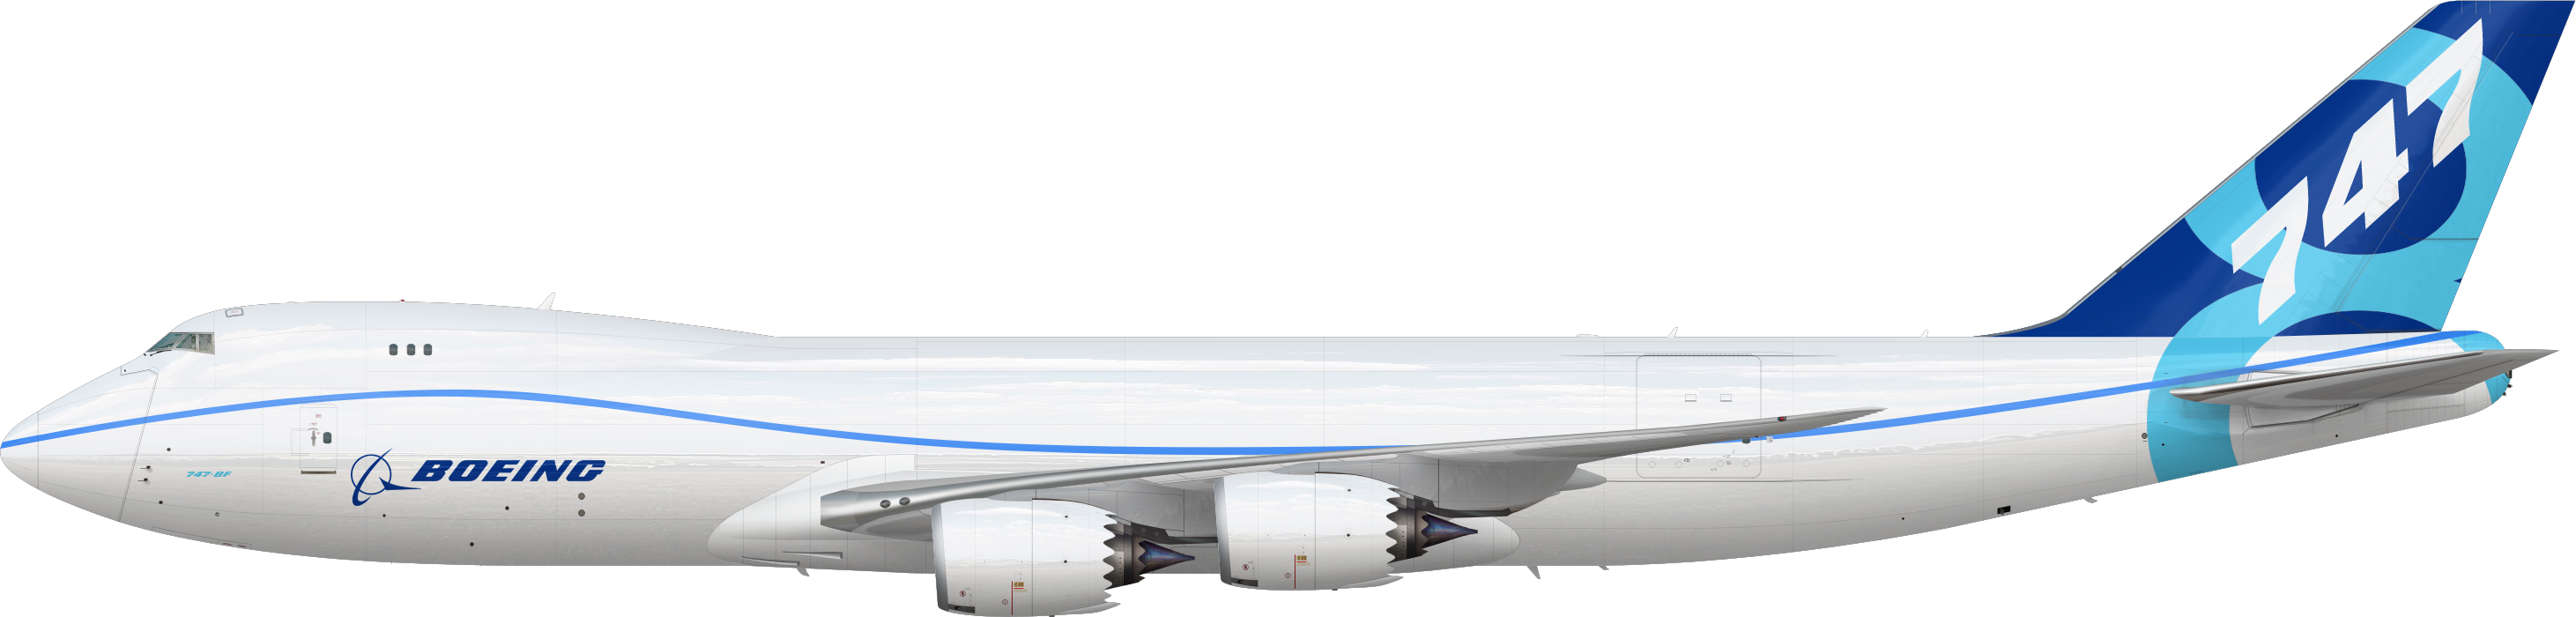 [Image: 747-8F.png]